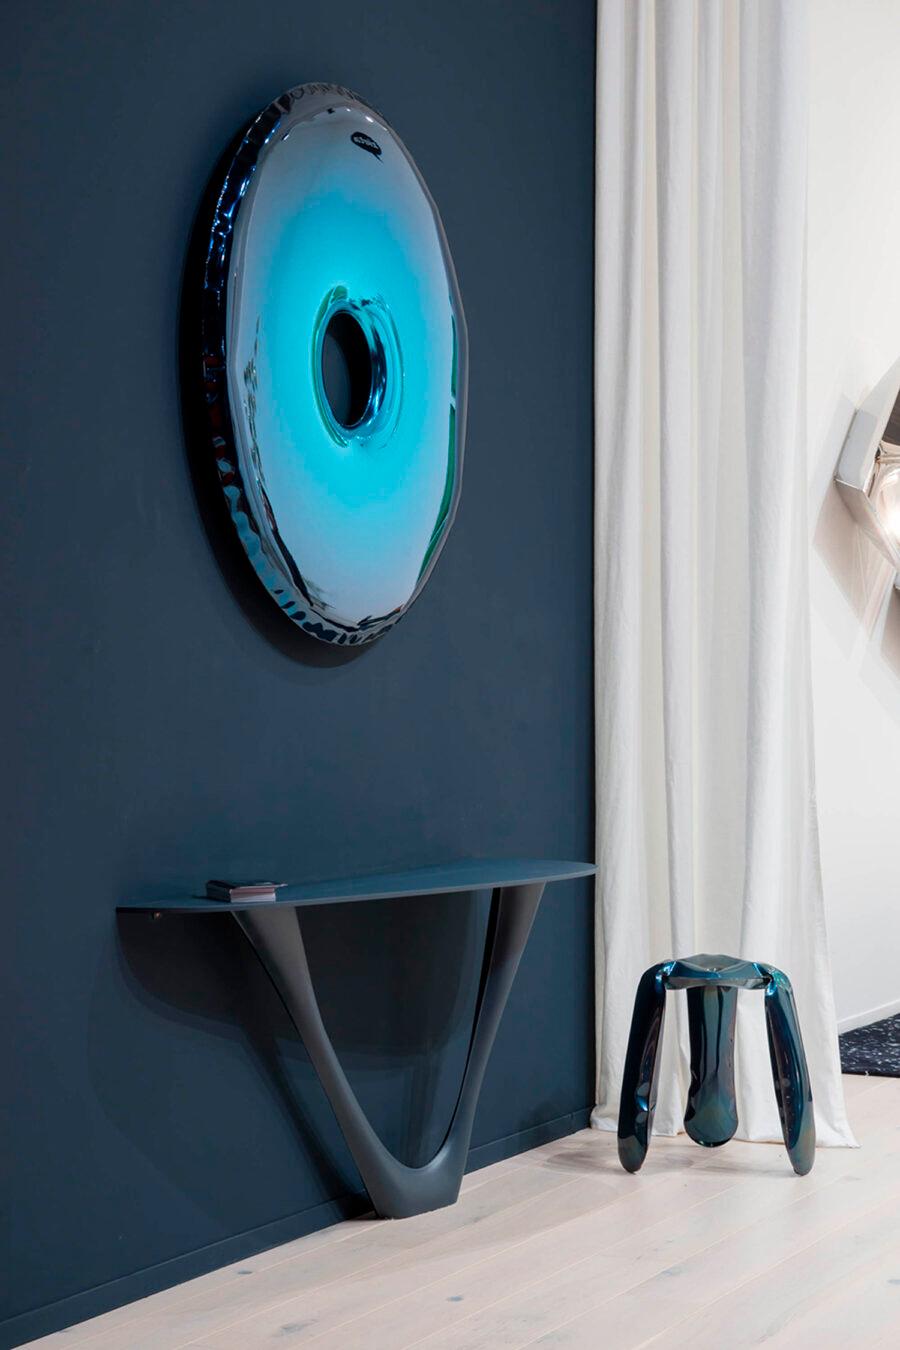 Rondo mirror 'Deep Space Blue' by Zieta Prozessdesign
Gradient collection - Deep Space Blue

Stainless steel
Measures: 75 x 6 cm.

Several sizes available: 
Diameter 75 cm / 120 cm / 150 cm



Zieta is best known for his collection of